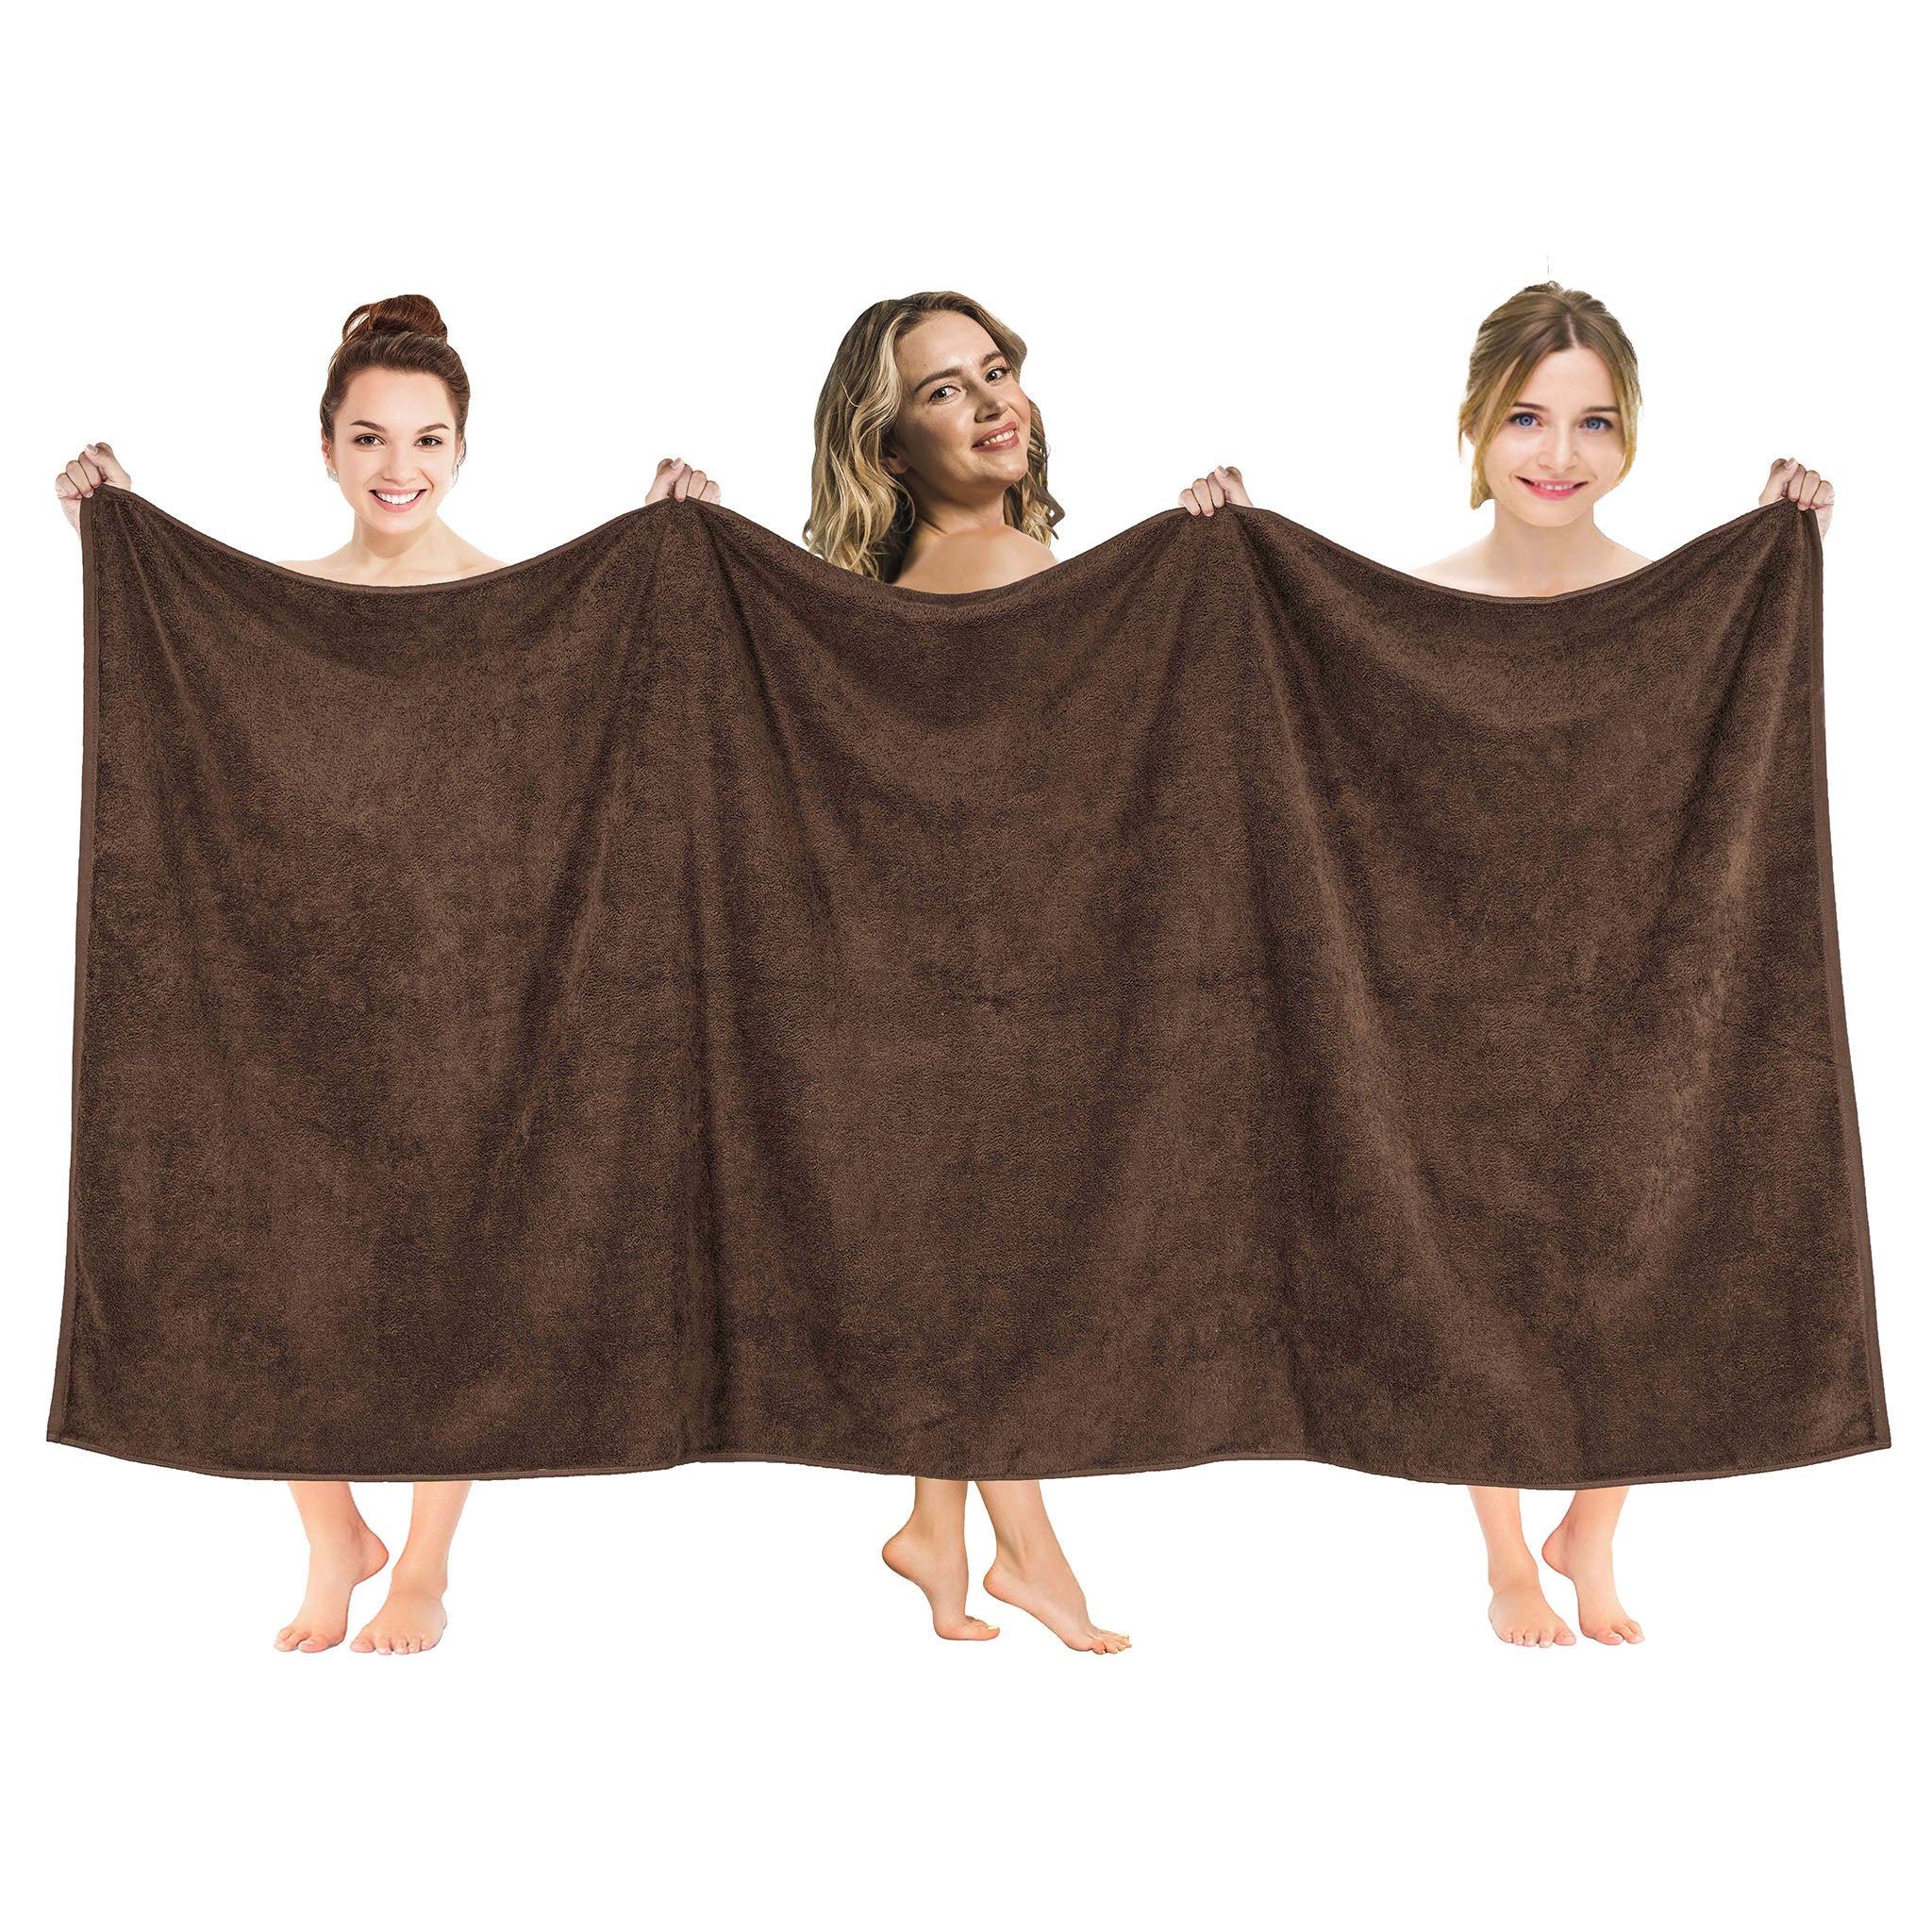 SR-HOME Oversized Bath Sheets Towels For Adults Luxury Bath Towels Extra  Large Sets,2 Piece